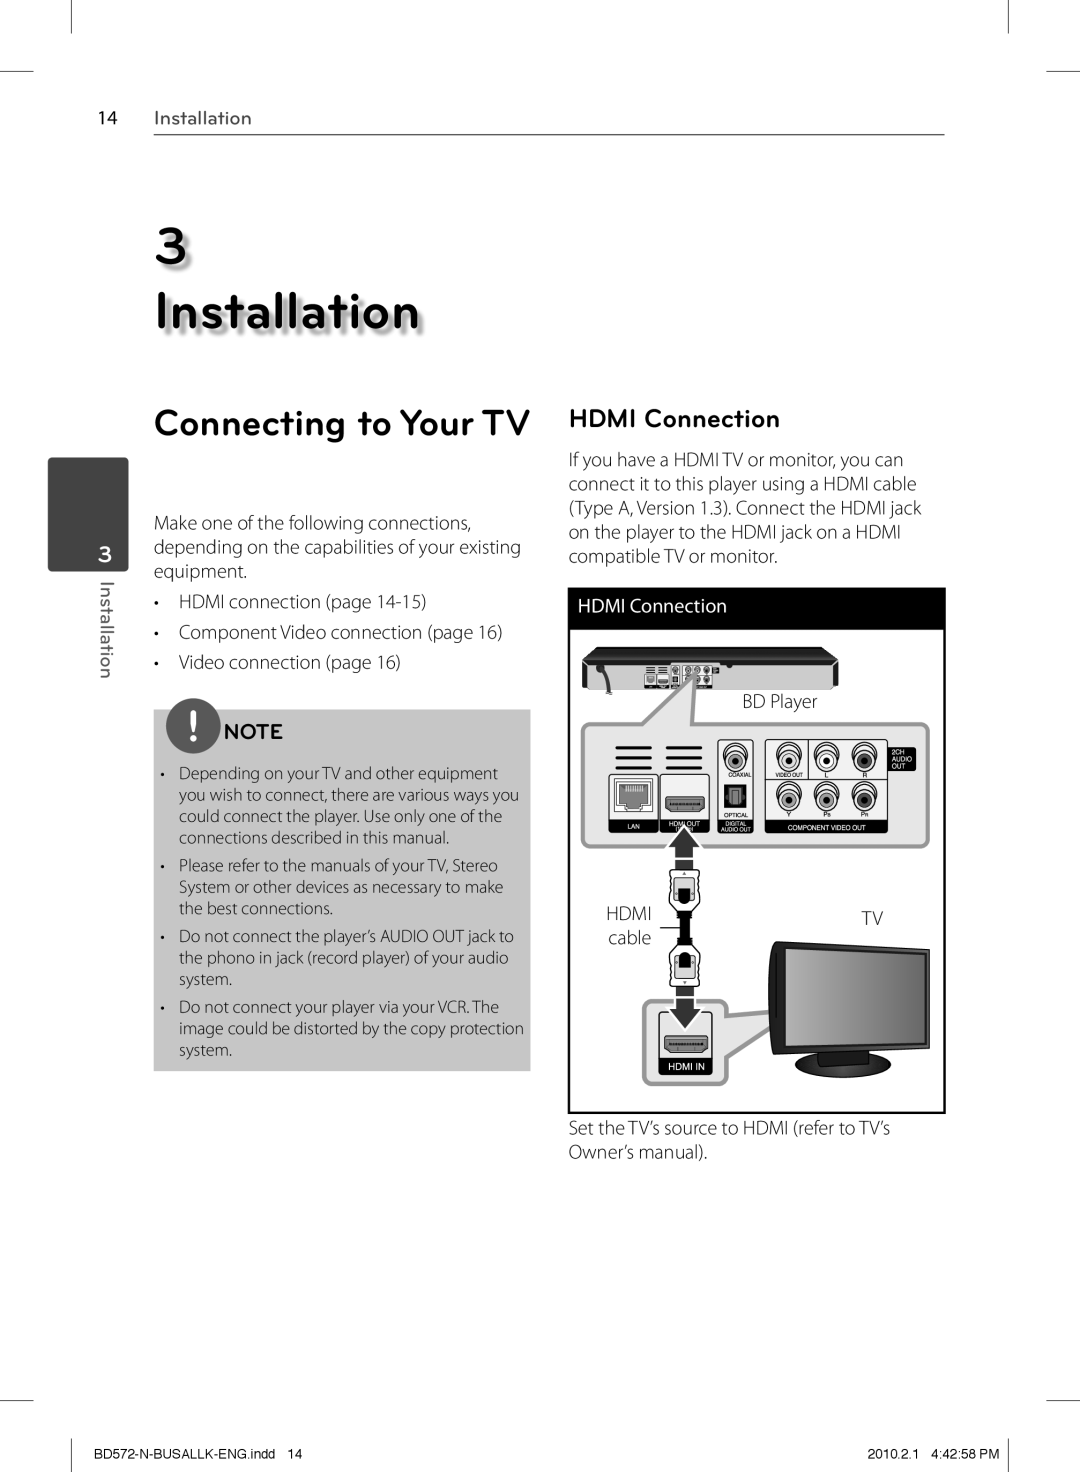 LG Electronics BD570 owner manual Installation, Connecting to Your TV, HDMI Connection 